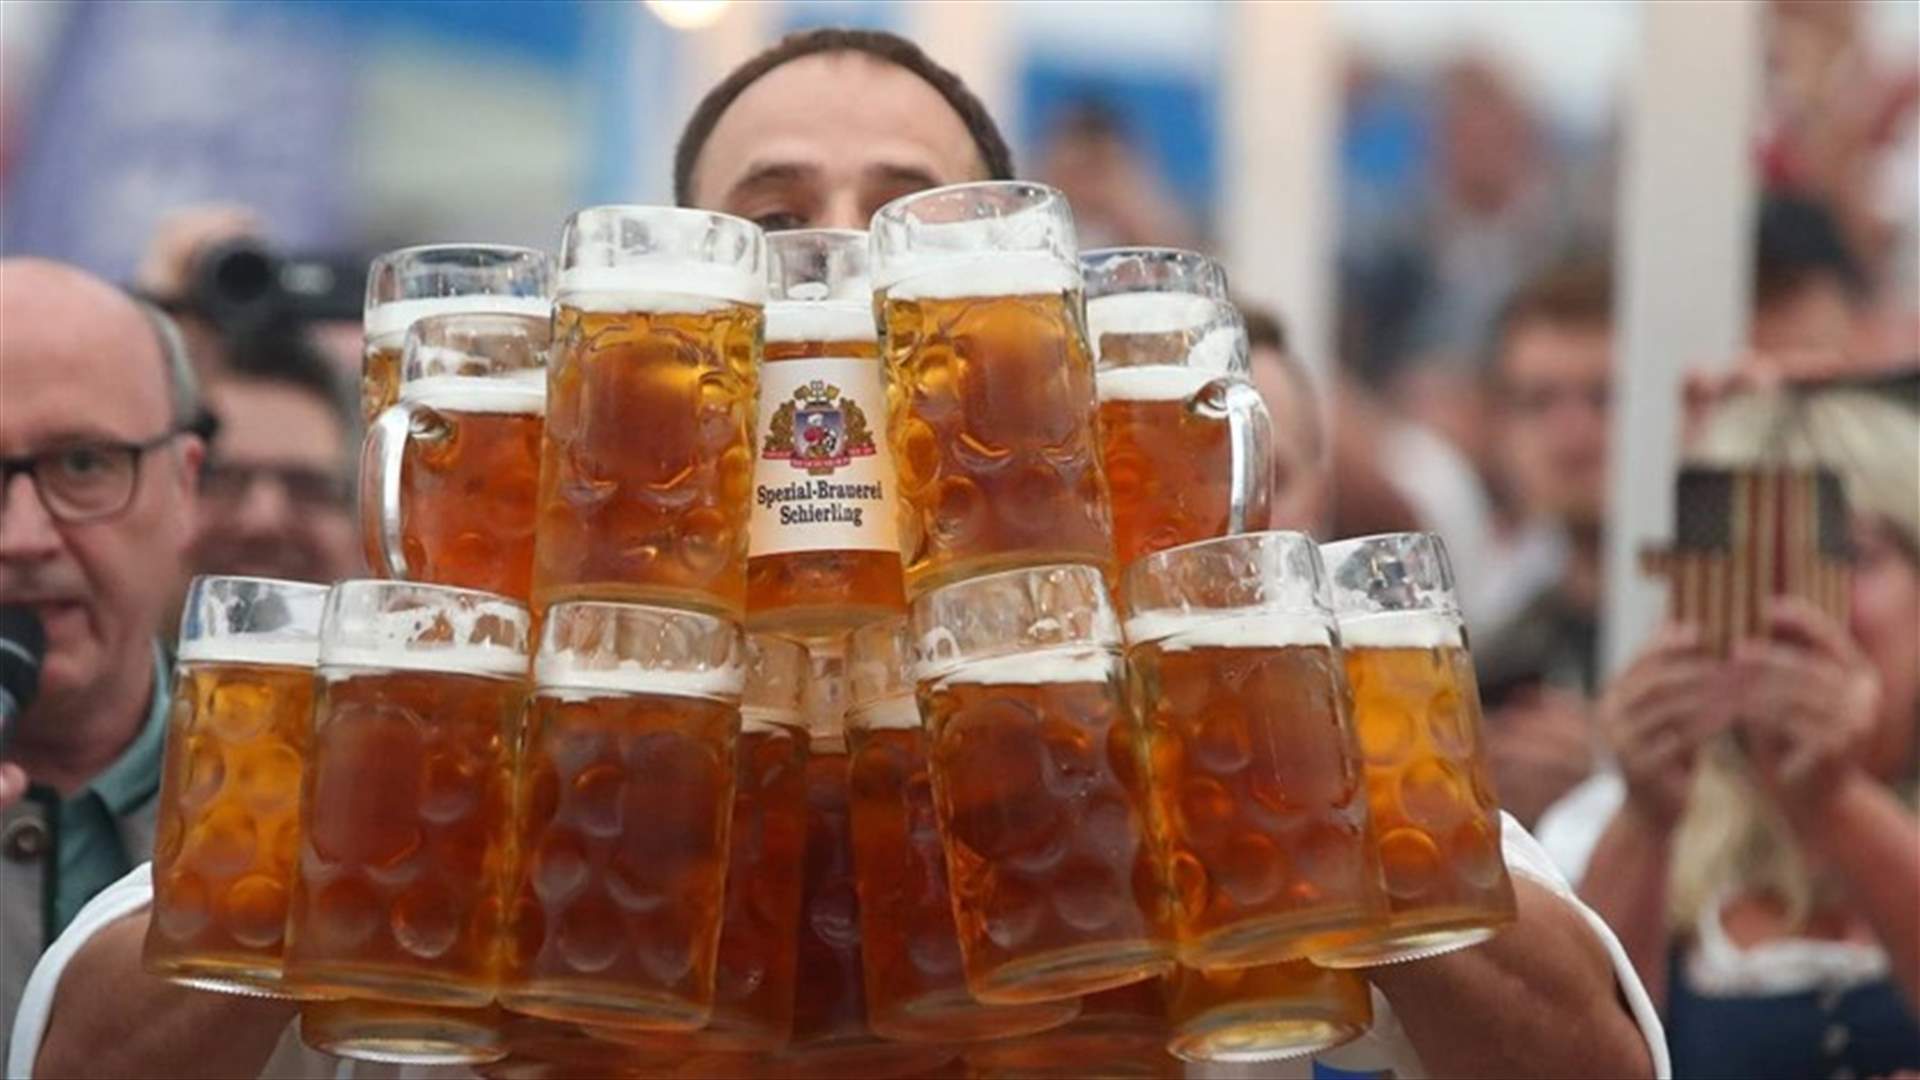 Prost! German Beats His Own World Record For Carrying Beer Steins